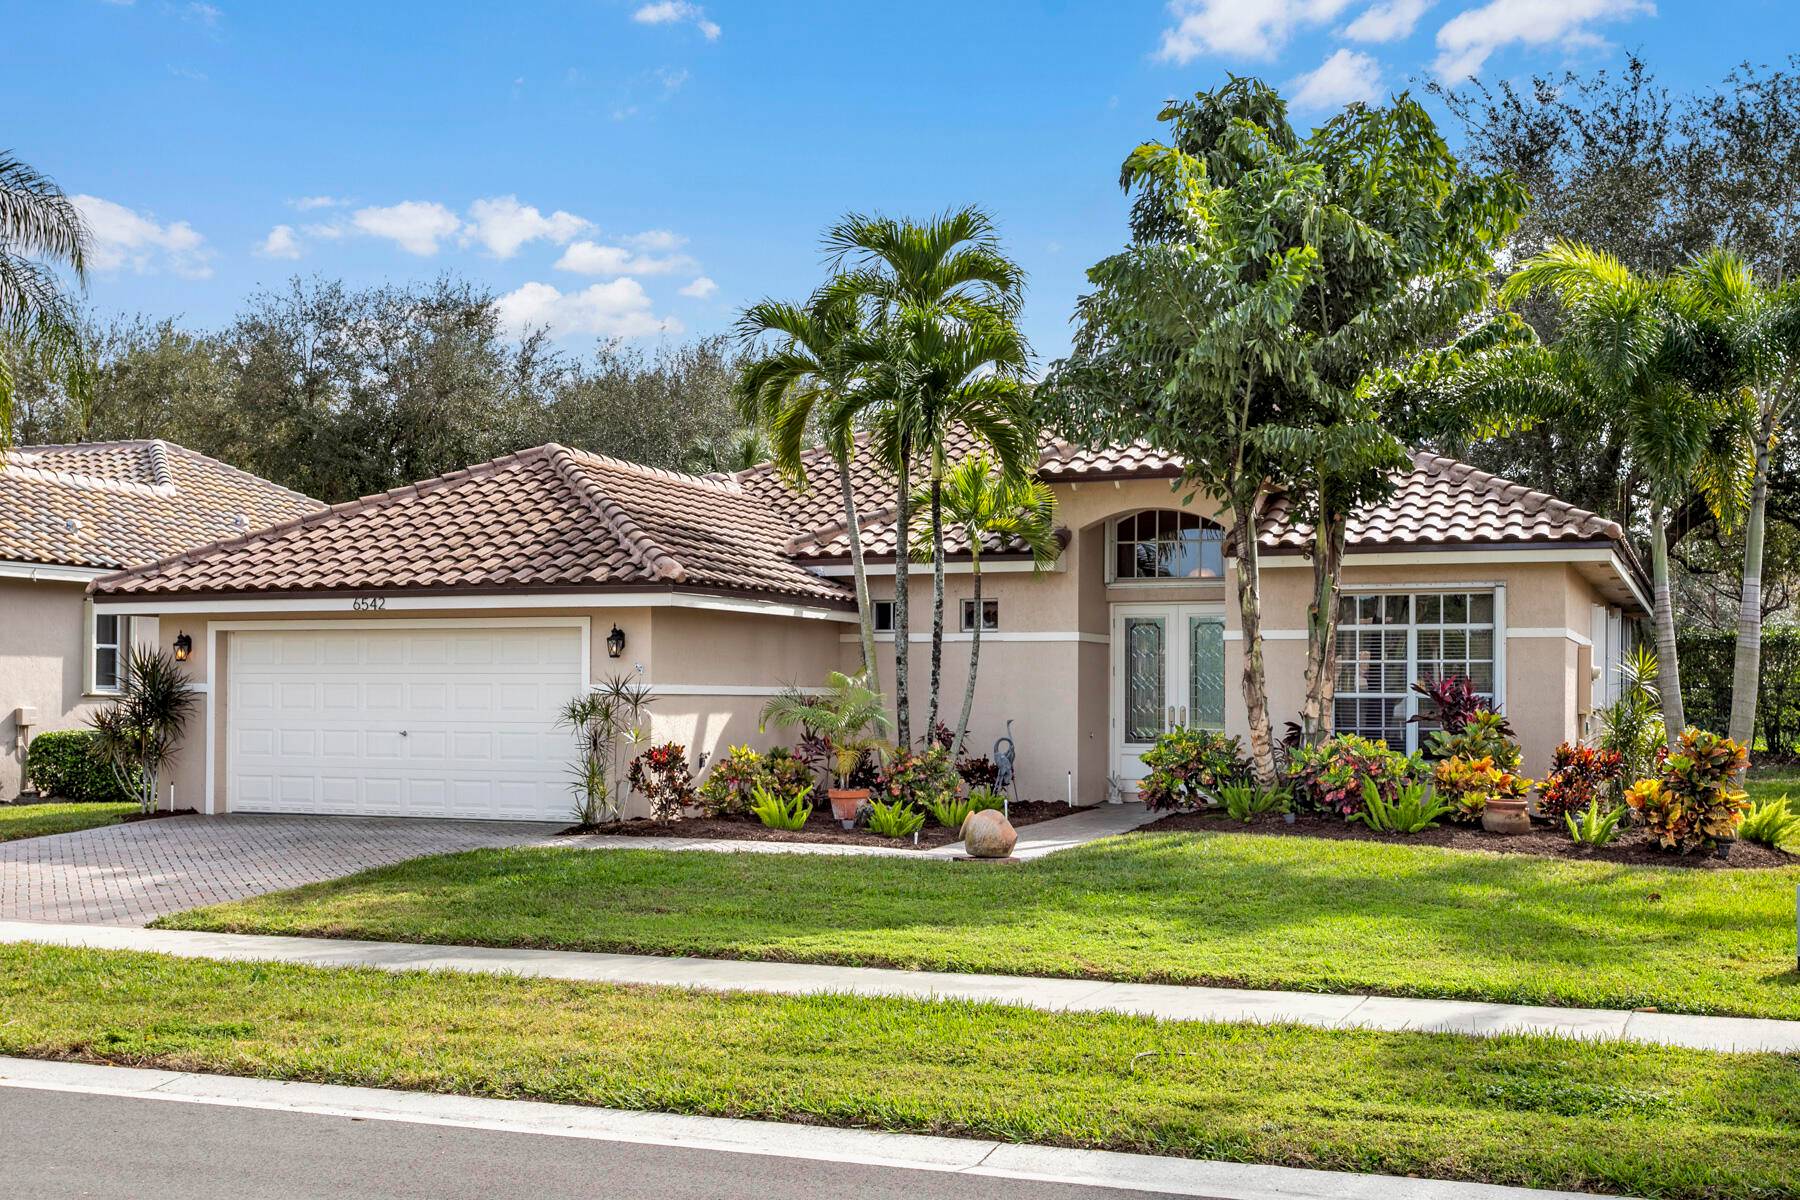 See this exquisite home located in the gated 55 plus community of Sandhurst at Jog Estates.